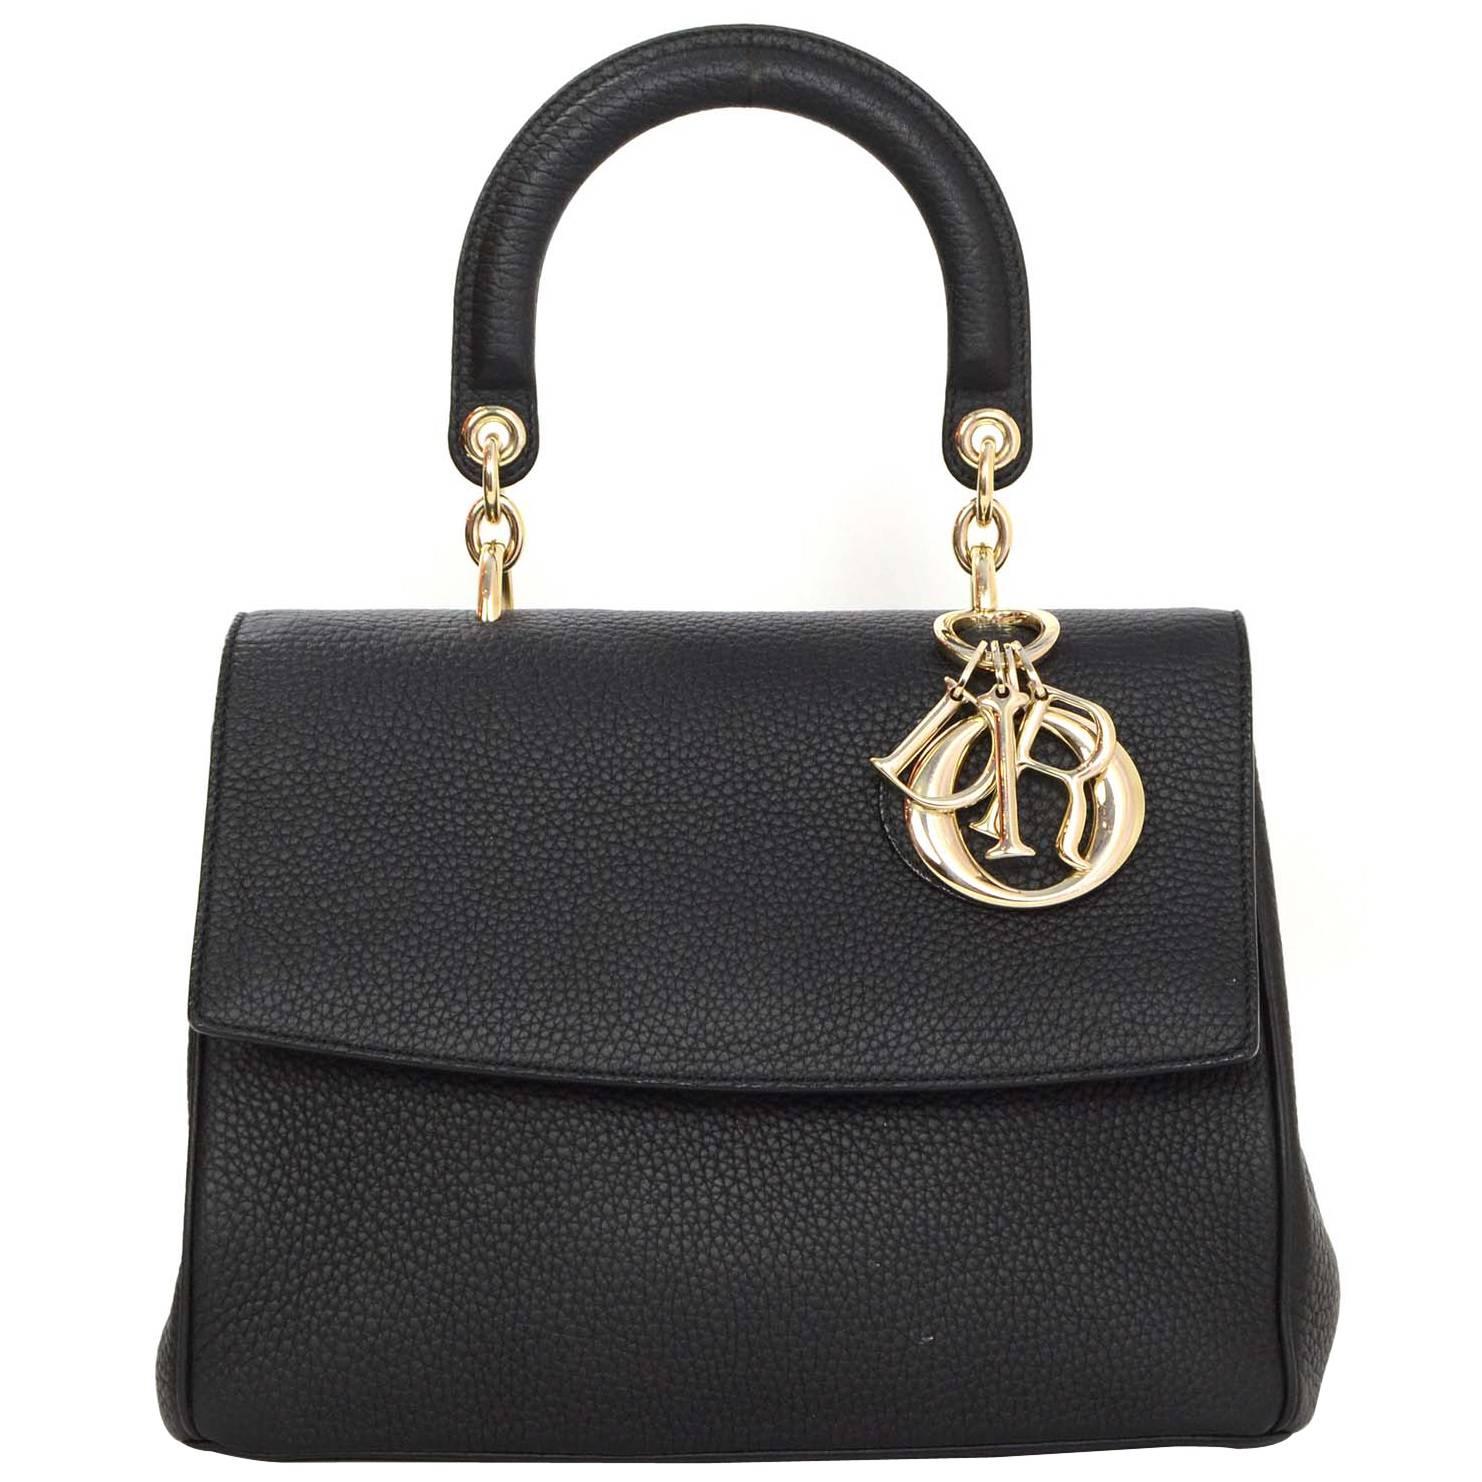 Christian Dior Black Leather Small Be Dior Bag GHW rt. $4, 400